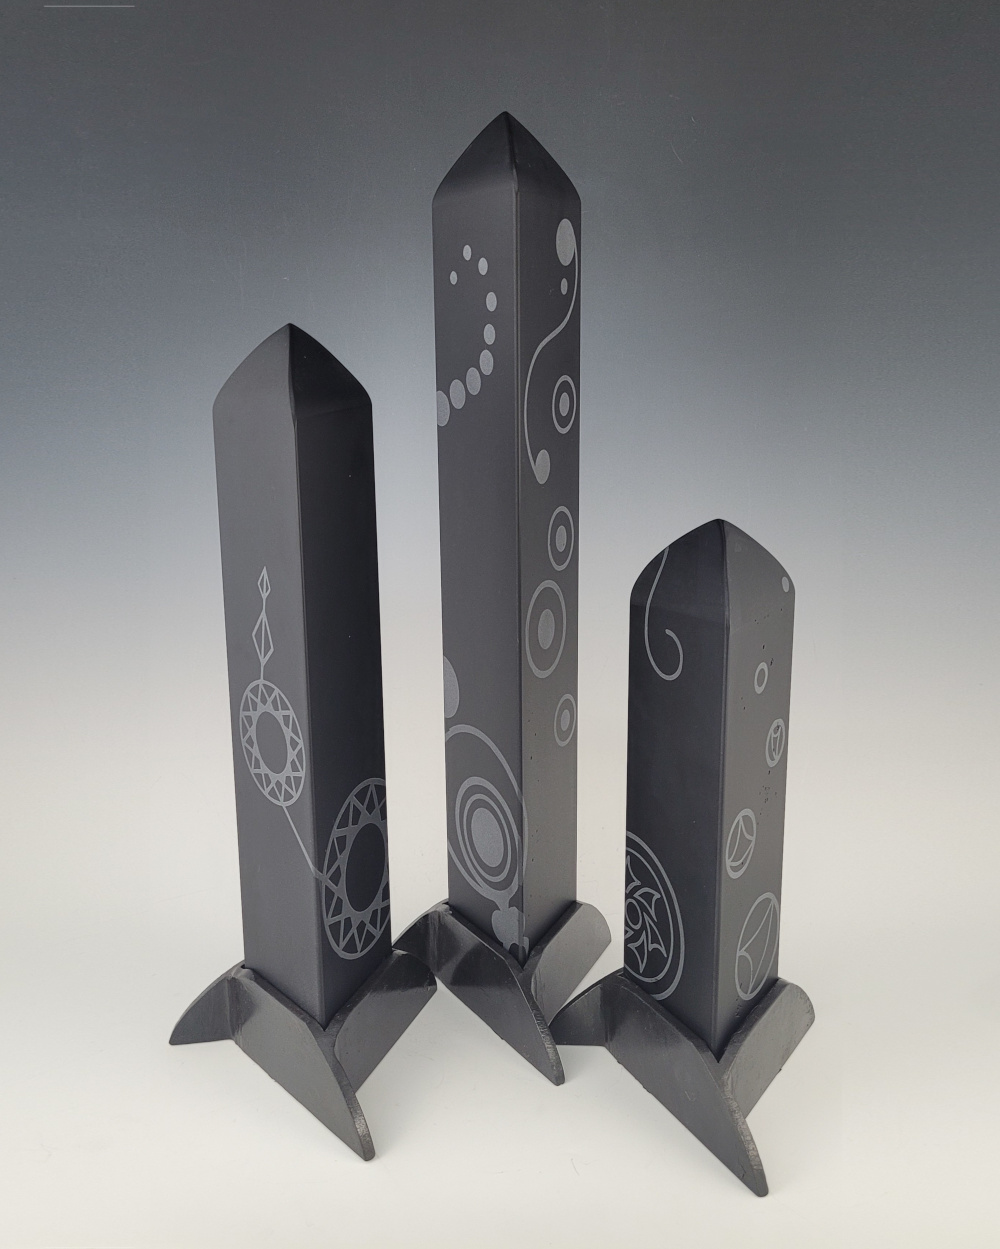 Ancient Civilizations, Solid Glass Triangular Obelisks with Crop Circle Images